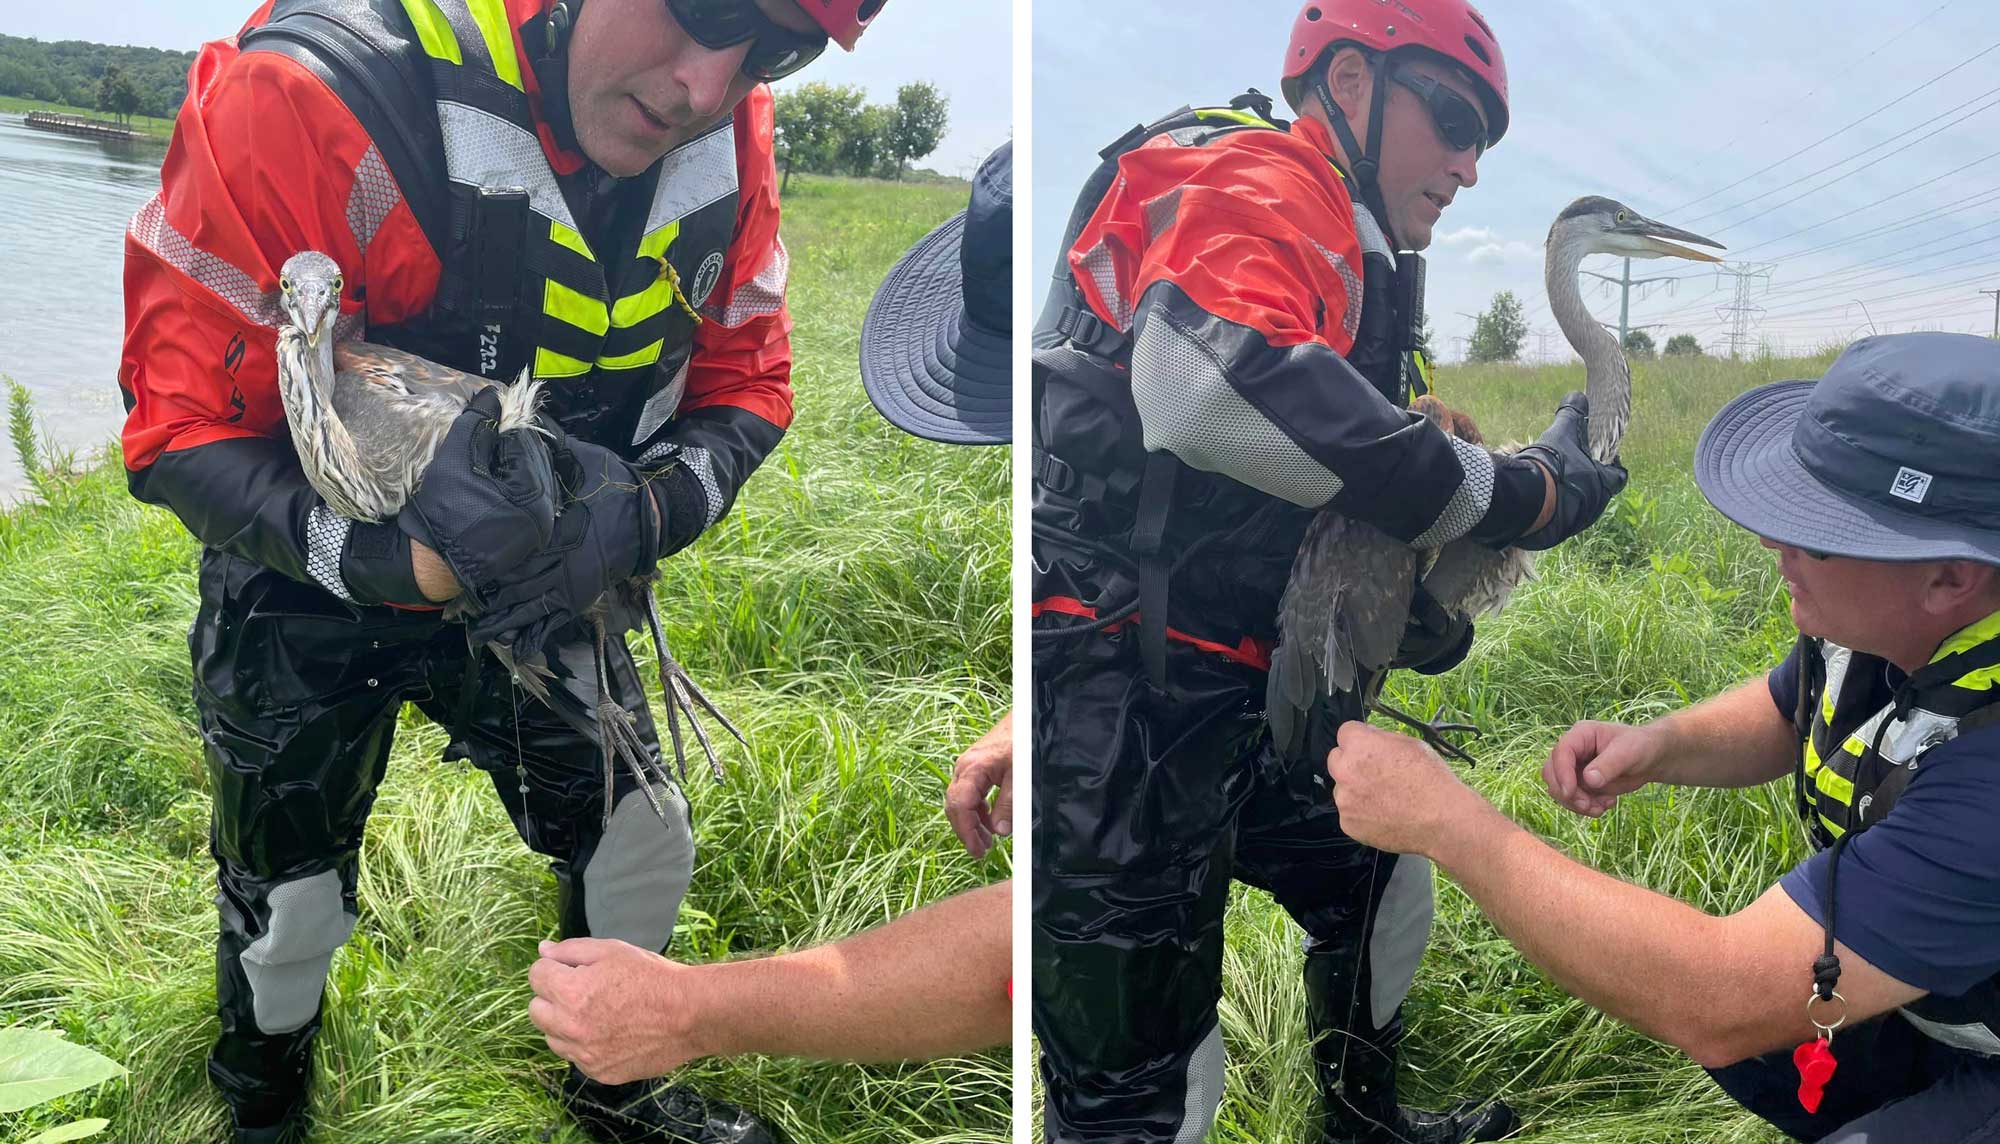 Firefighters work to free a great blue heron that was tangled in fishing line.